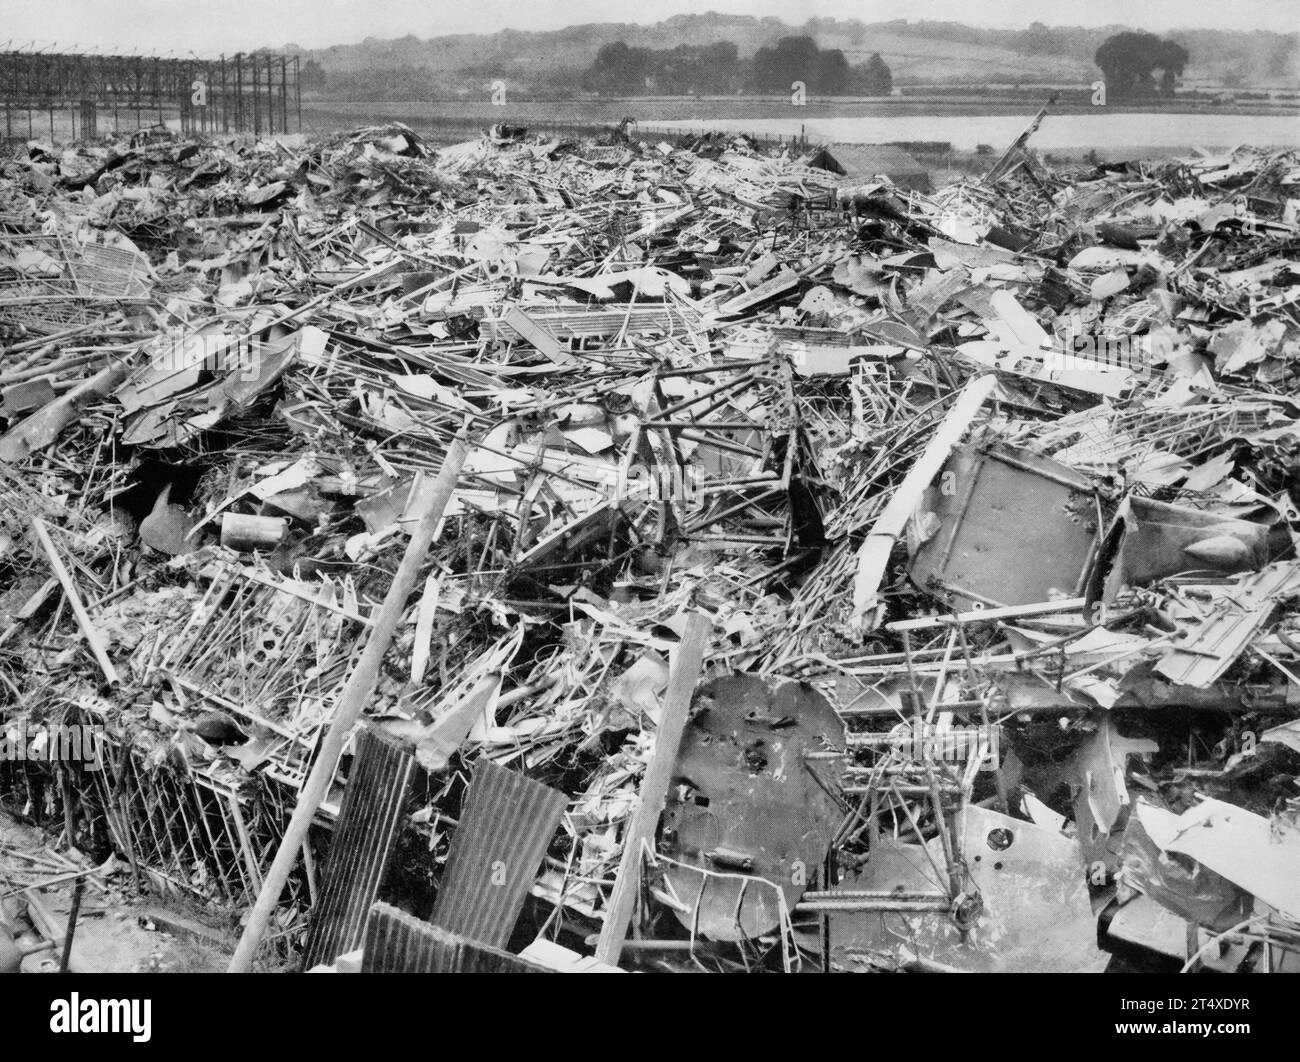 A dump of metal and other material from the large numbers of aircraft were shot down over the England during the Battle of Britain that lasted from 10th July until 31st October, 1940. Stock Photo